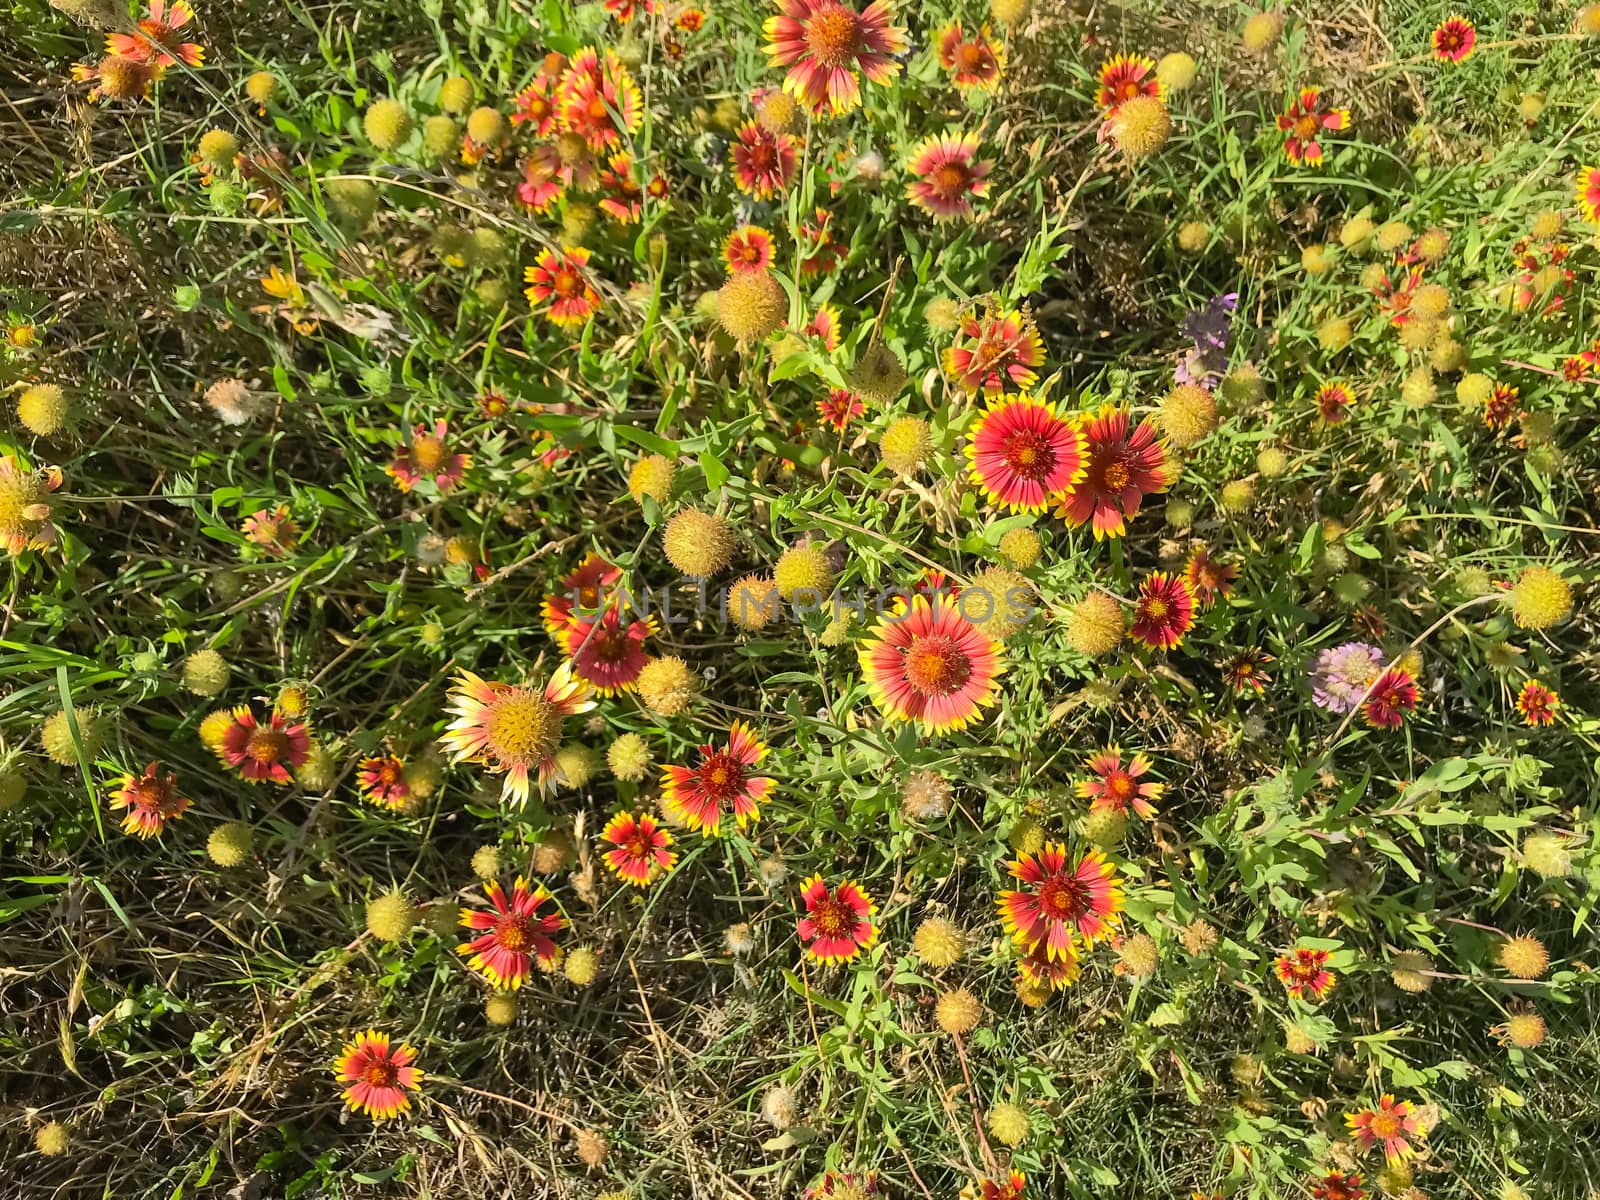 Top view blossom bush of red-orange Indian Blanket wildflower at springtime in Coppell, Texas, USA by trongnguyen